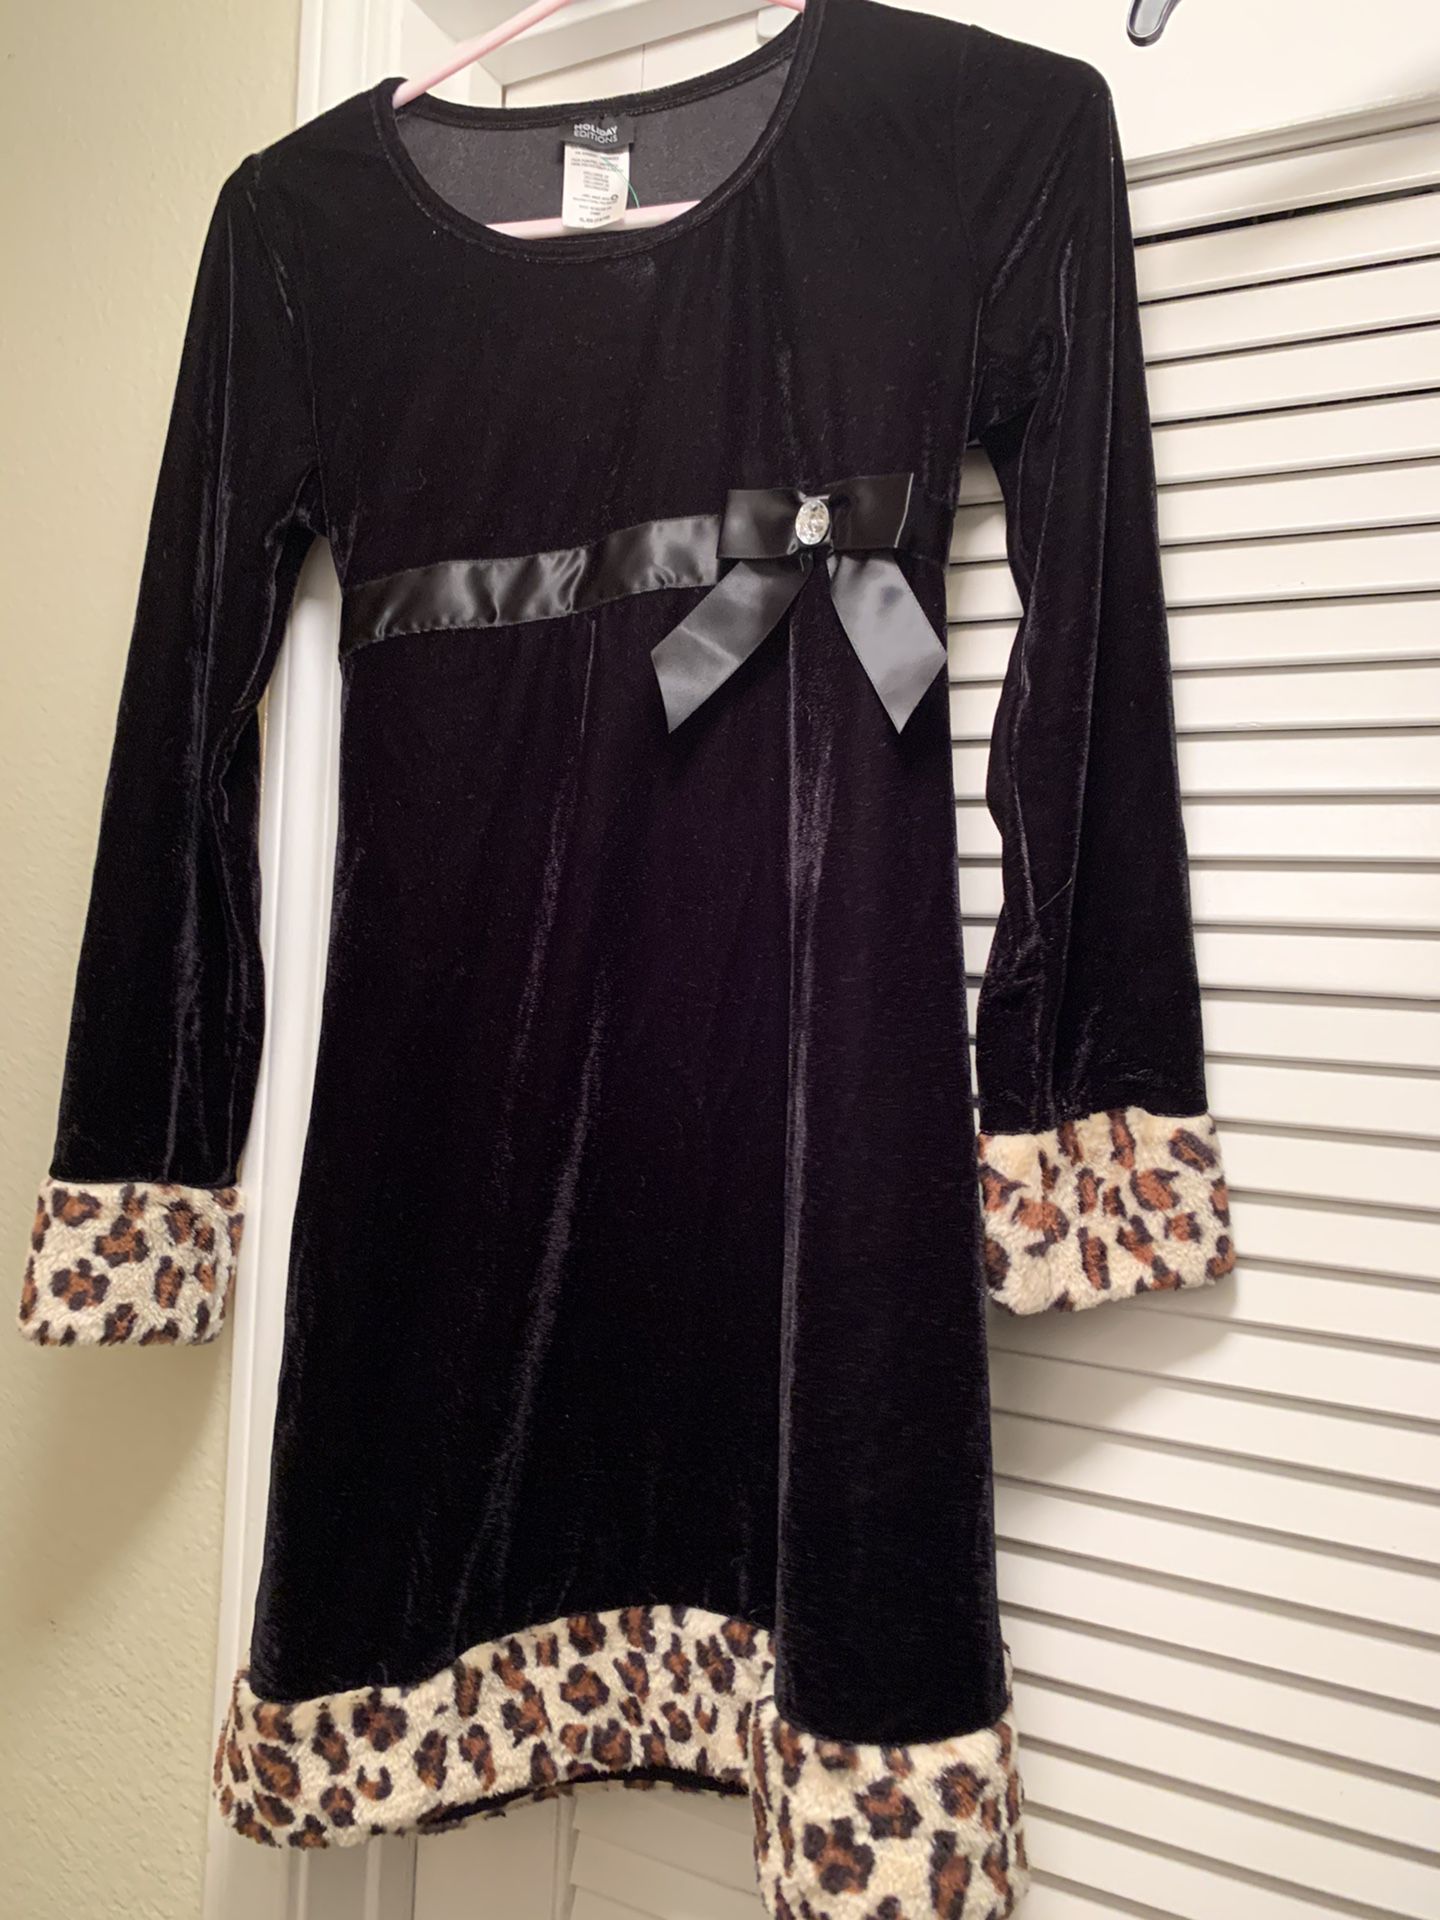 New girls holiday black velvet dress. Tie back with zipper. Size girls 12/16. Faux fur on hem and arms.